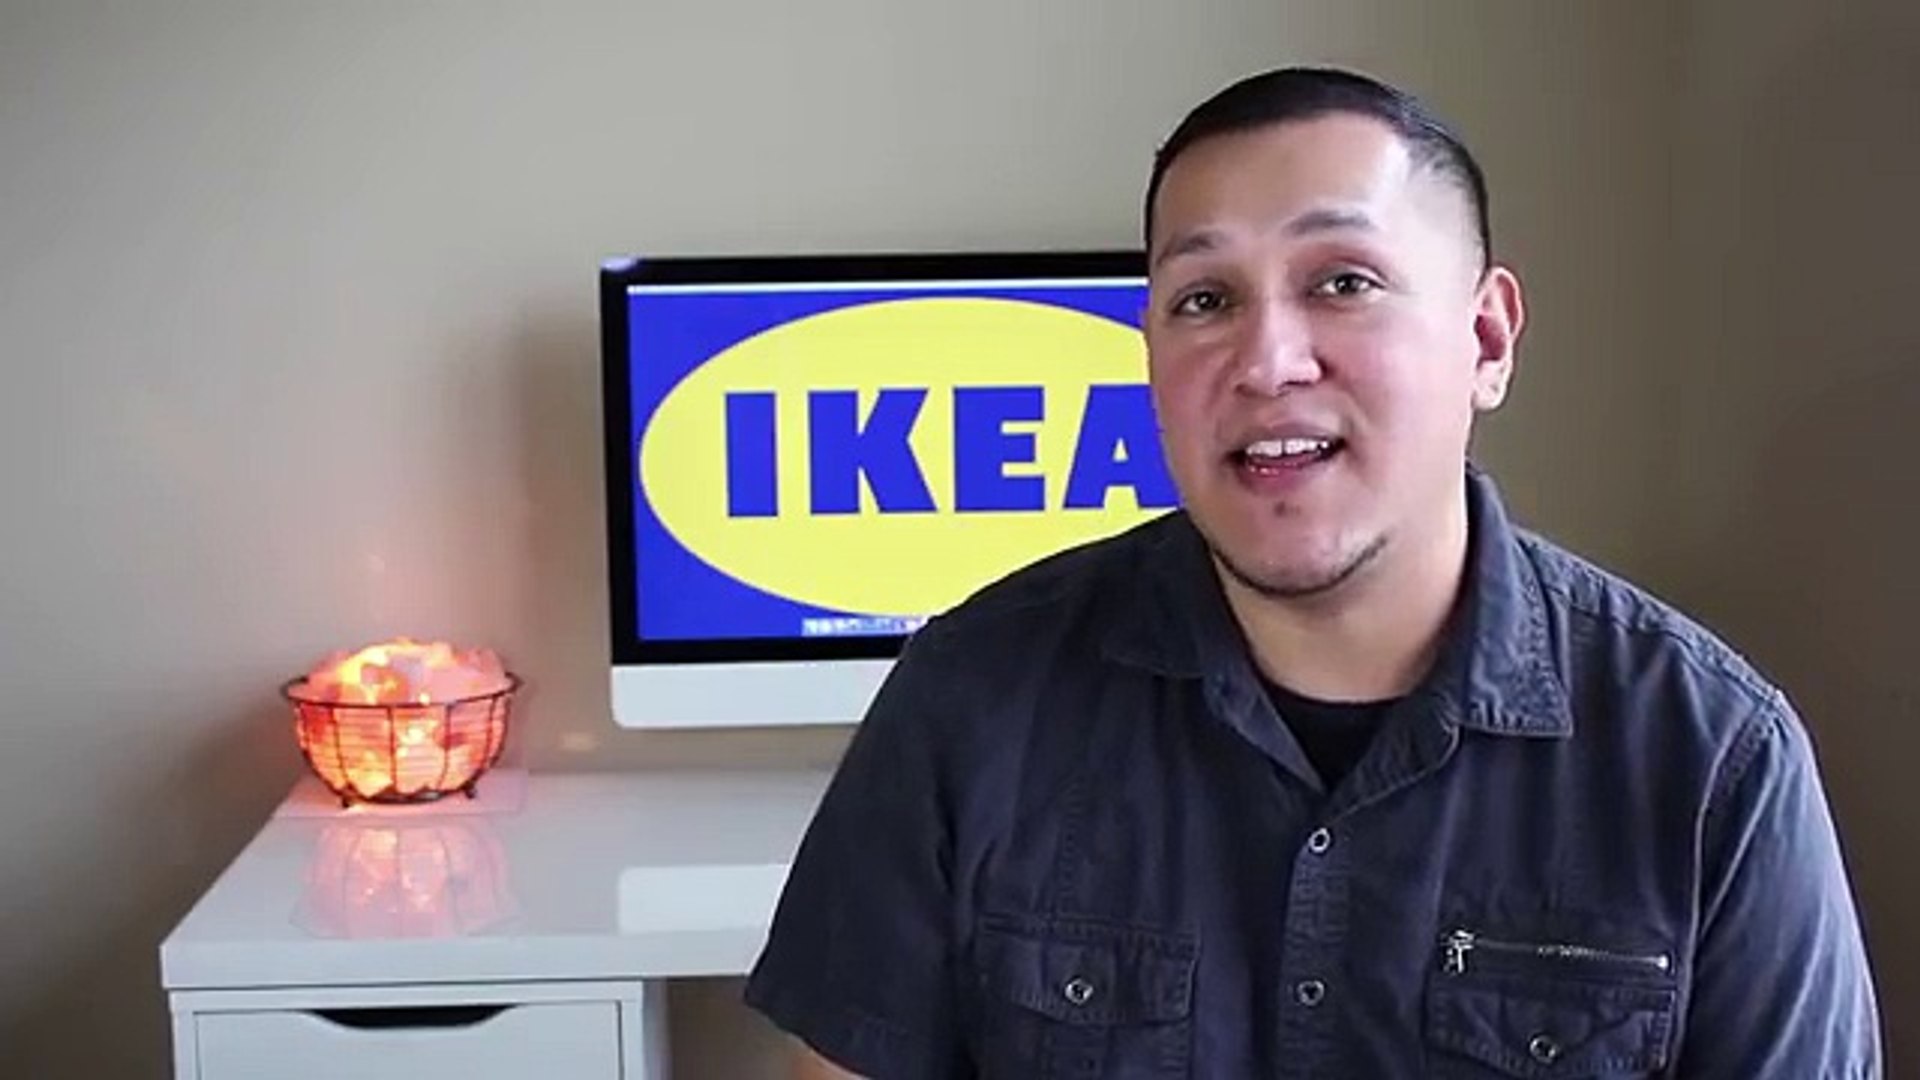 How To Build Ikea Alex Drawers Build Ikea Furniture Video